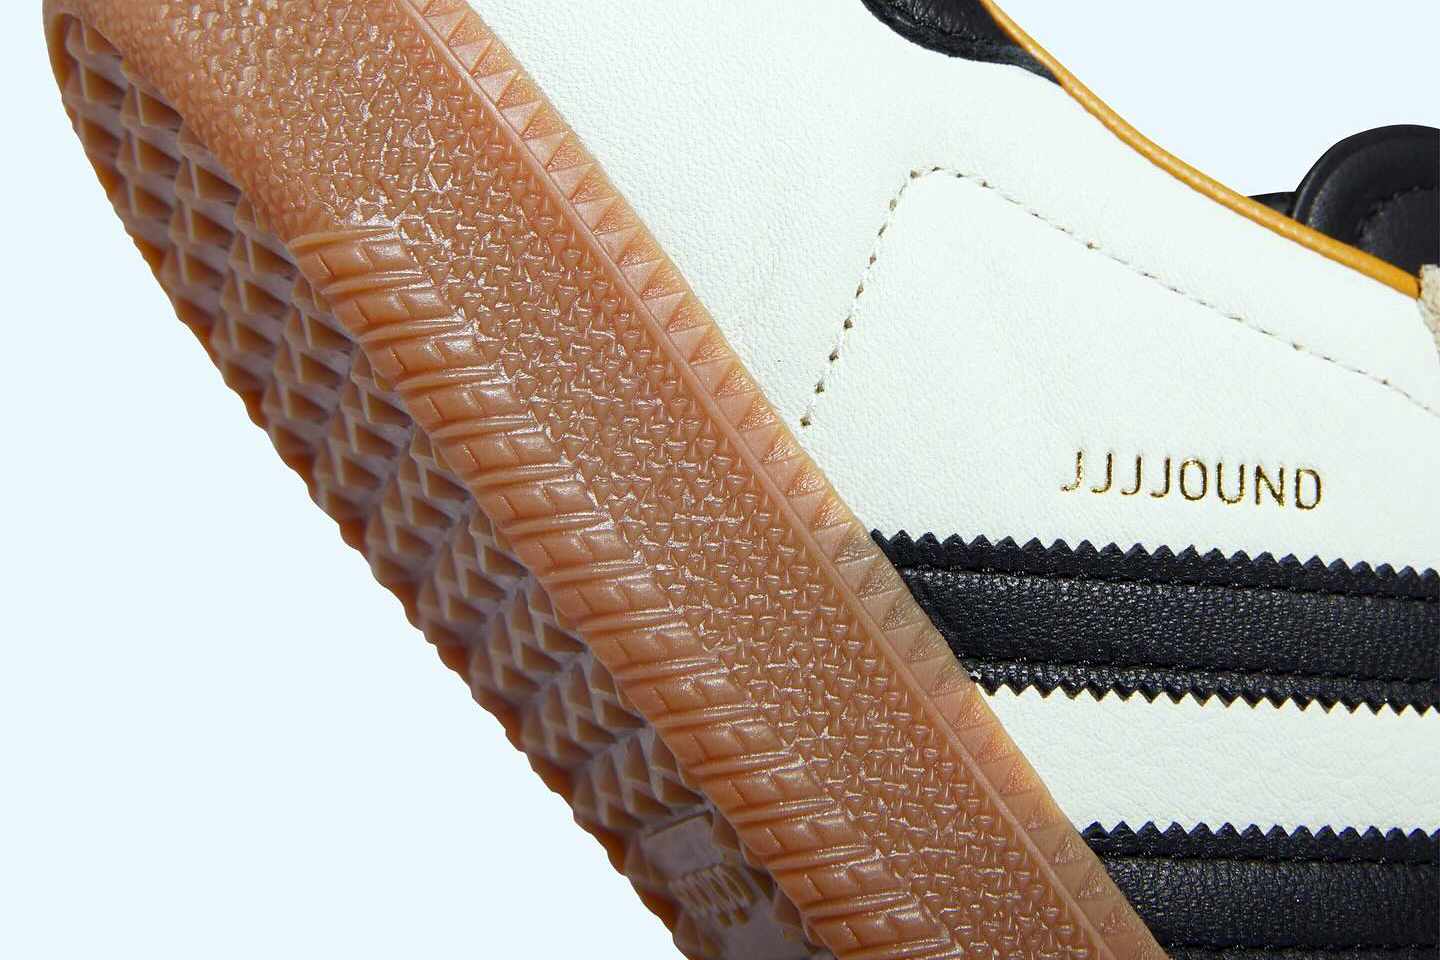 JJJJound's adidas Samba sneaker collaboration in white and black leather with a gum sole